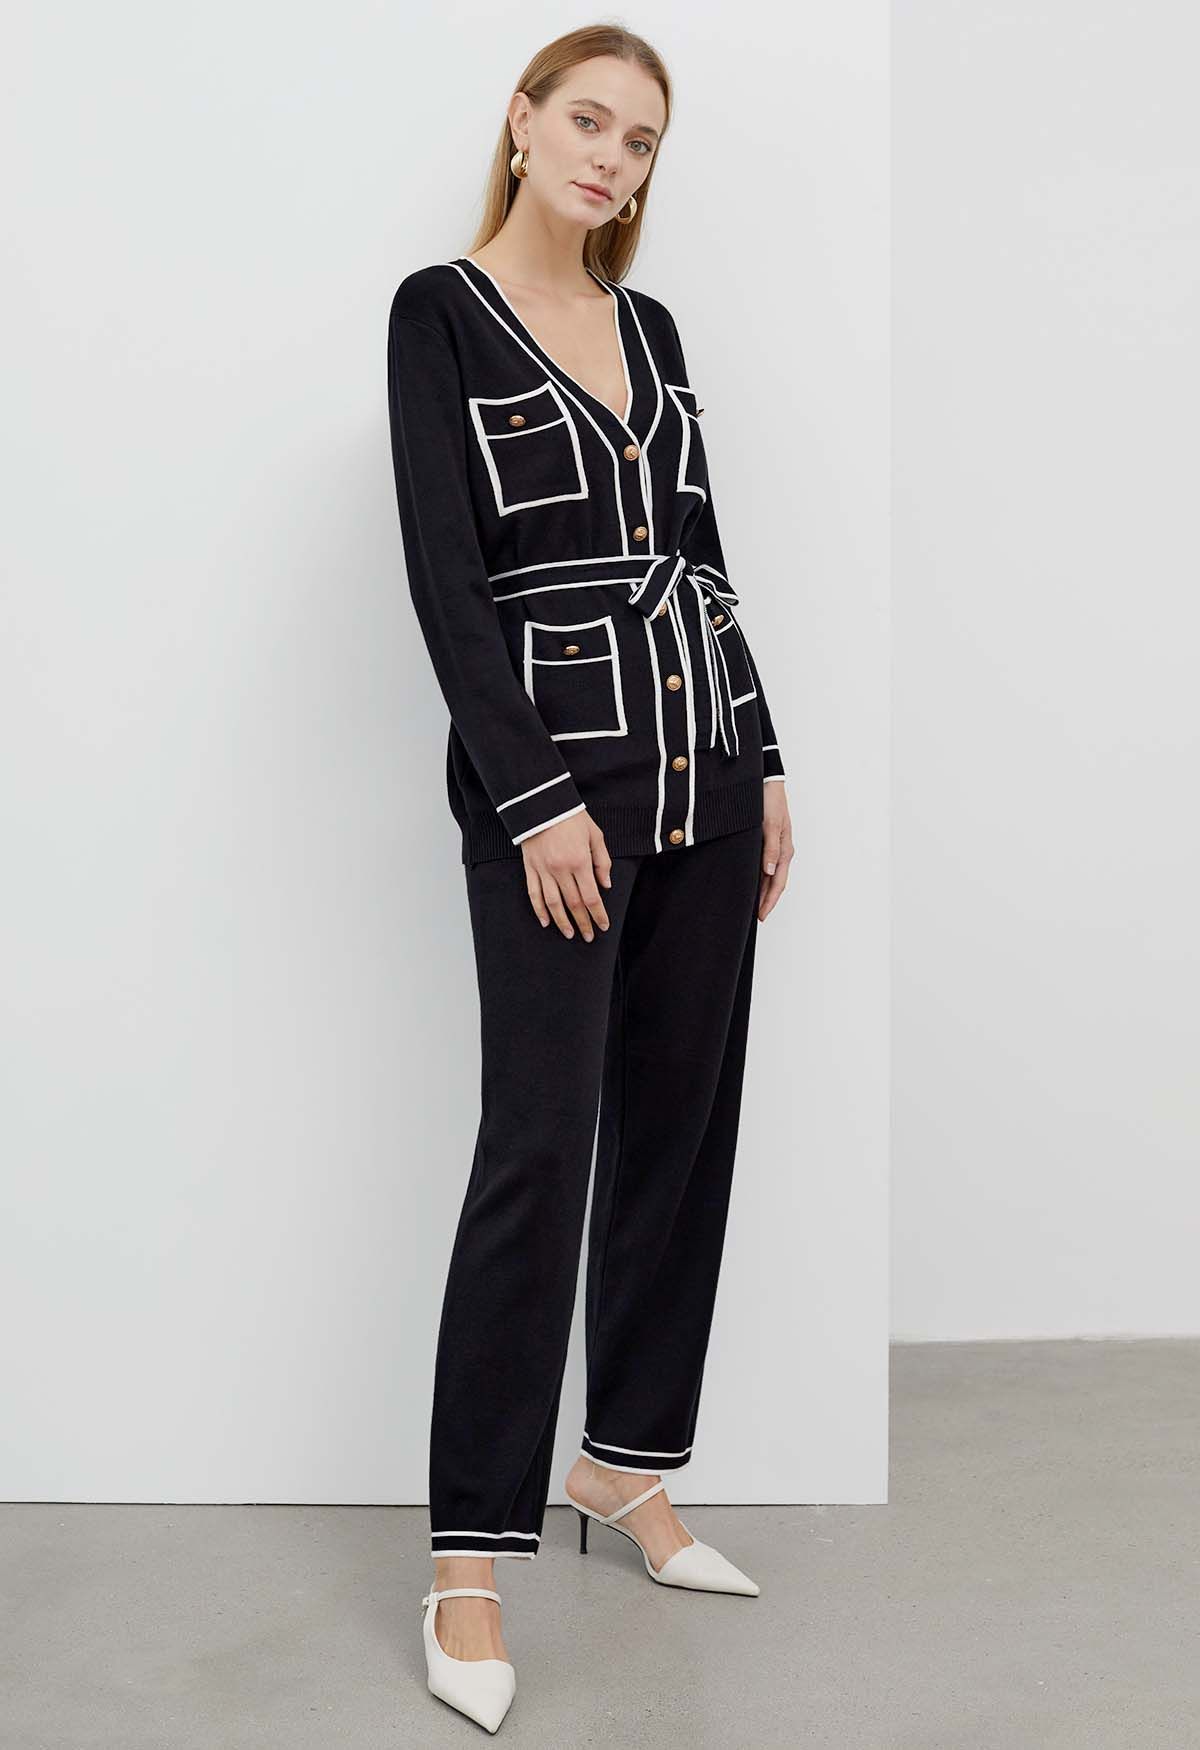 Contrast Edge Buttons Knit Cardigan and Pants Set in Black